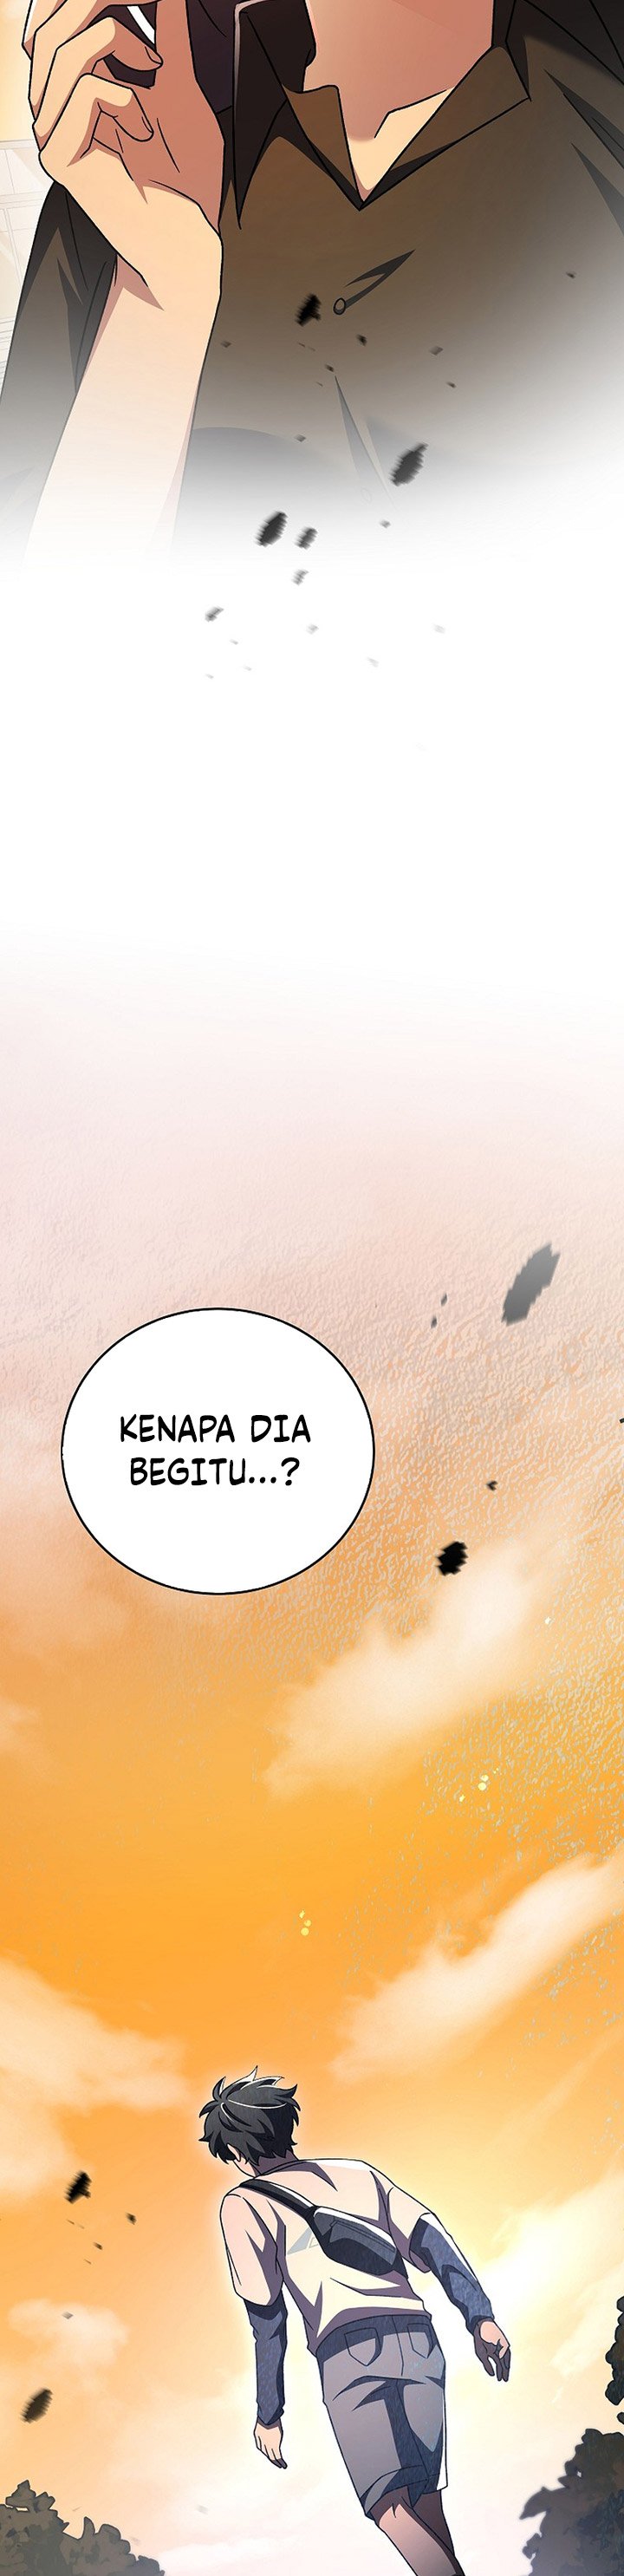 The Novel Extra (Remake) Chapter 99 End S2 - 483